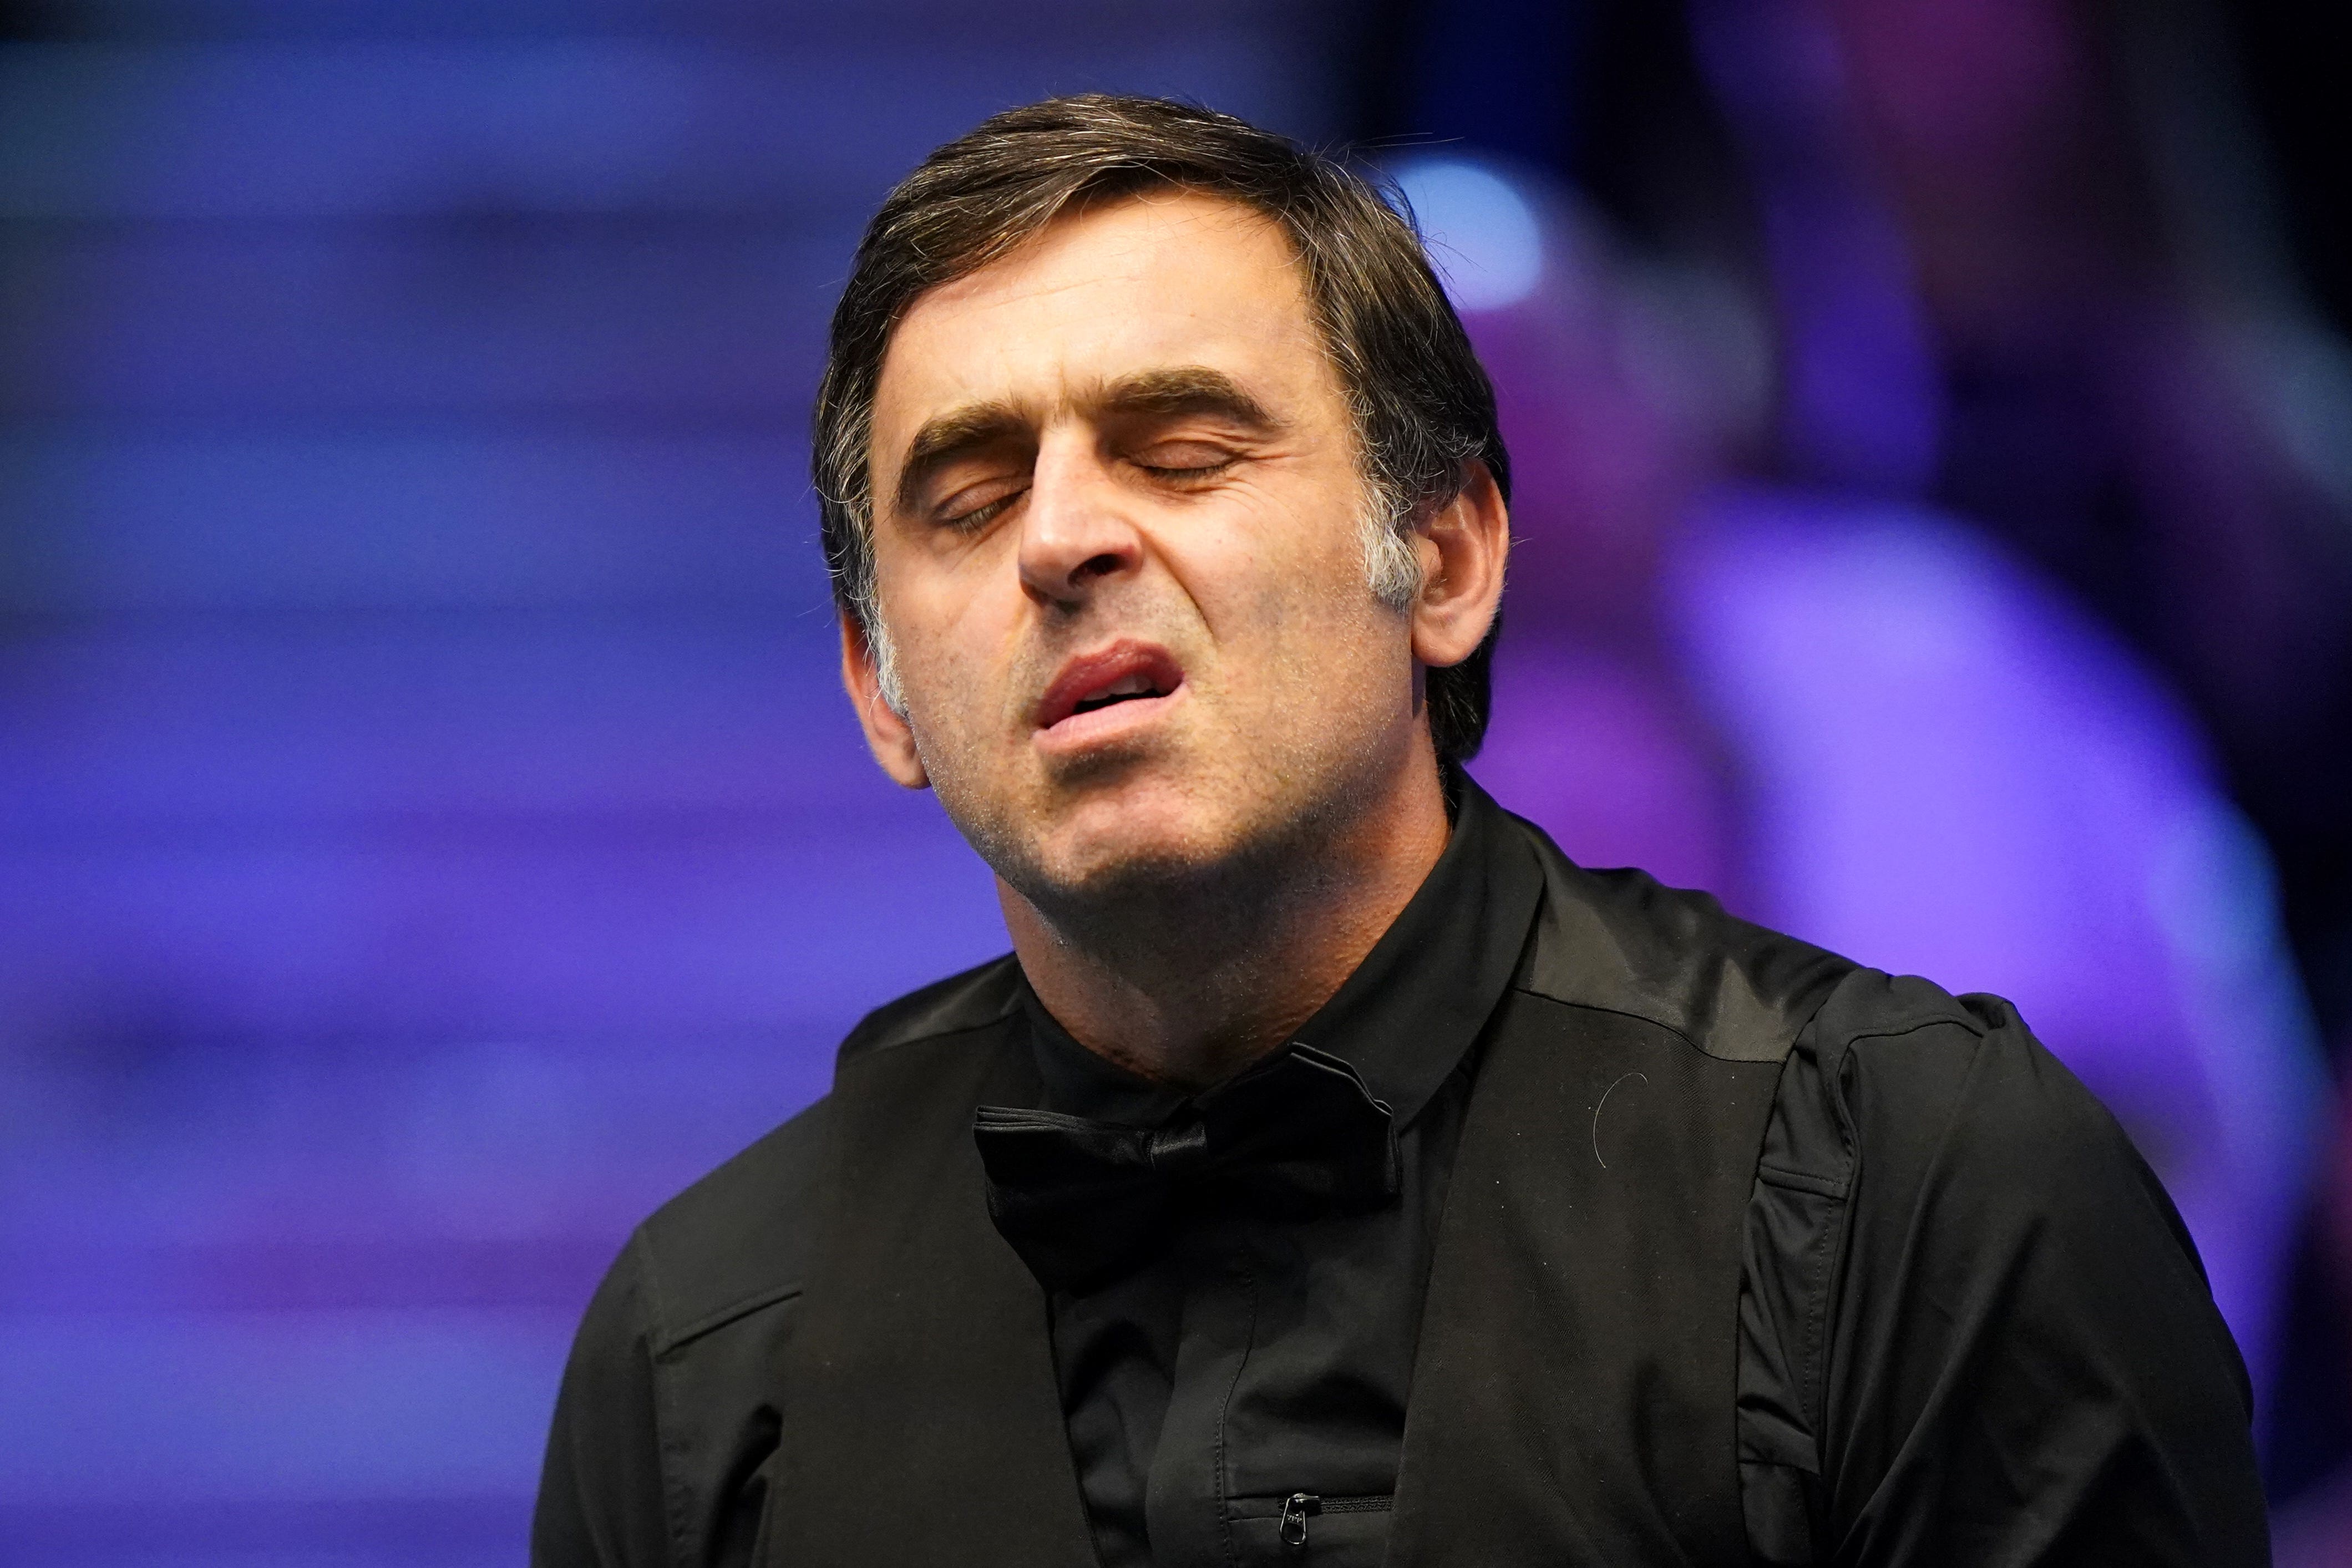 Ronnie O’Sullivan was whitewashed in a Triple Crown event for the first time at the UK Championship in York (Tim Goode/PA)